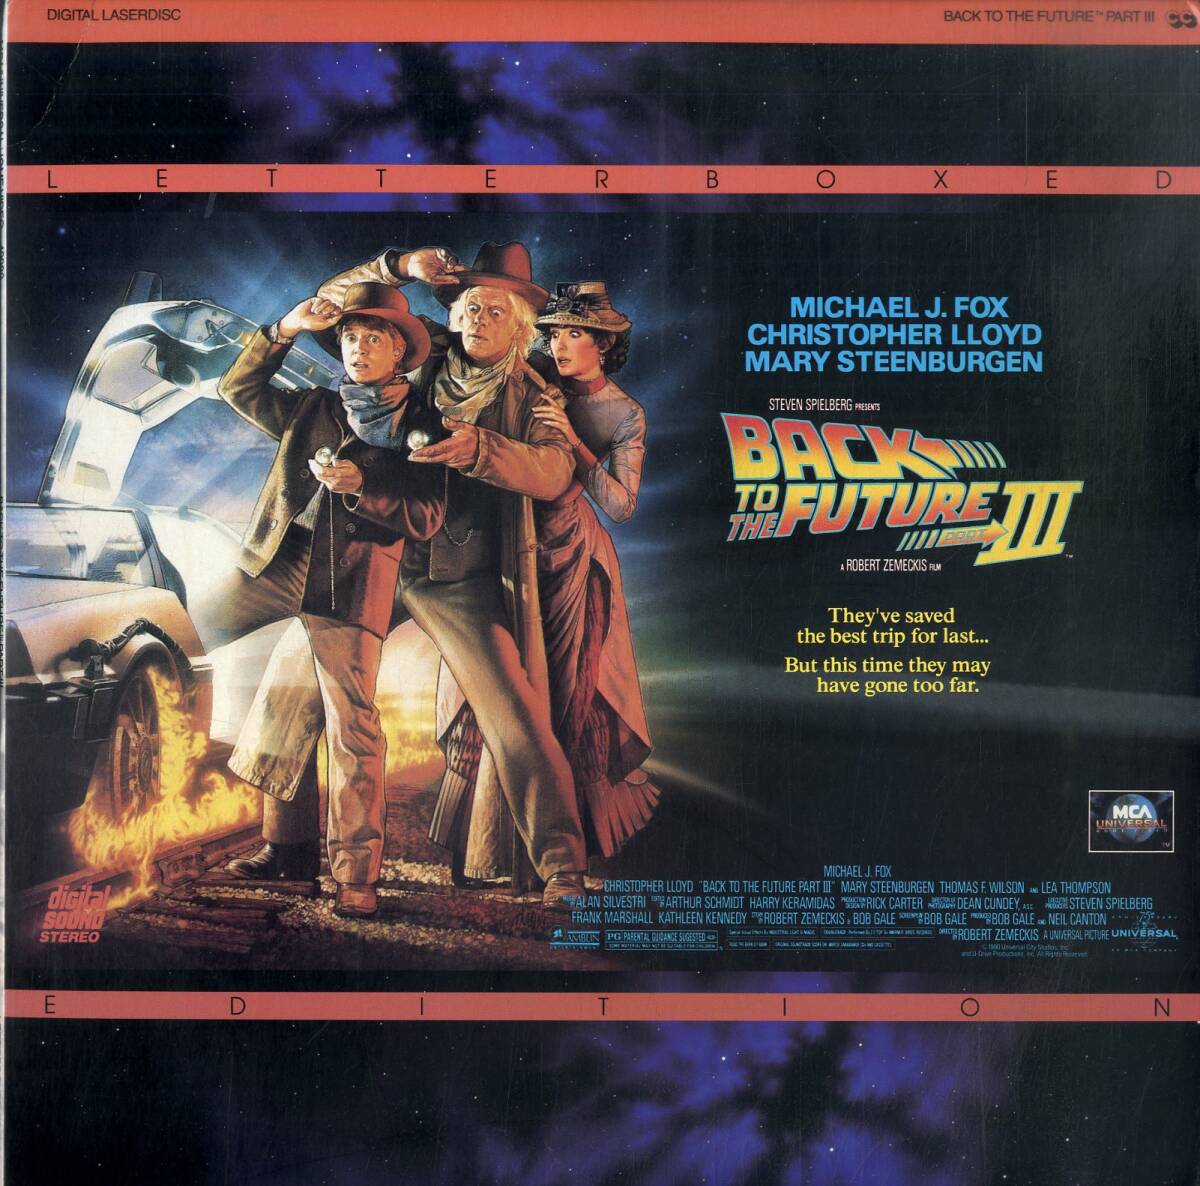 B00180645/LD2枚組/マイケル・Ｊ・フォックス「Back To The Future Part III (バック・トゥ・ザ・フューチャー3/Letterboxed Edition) 」の画像1